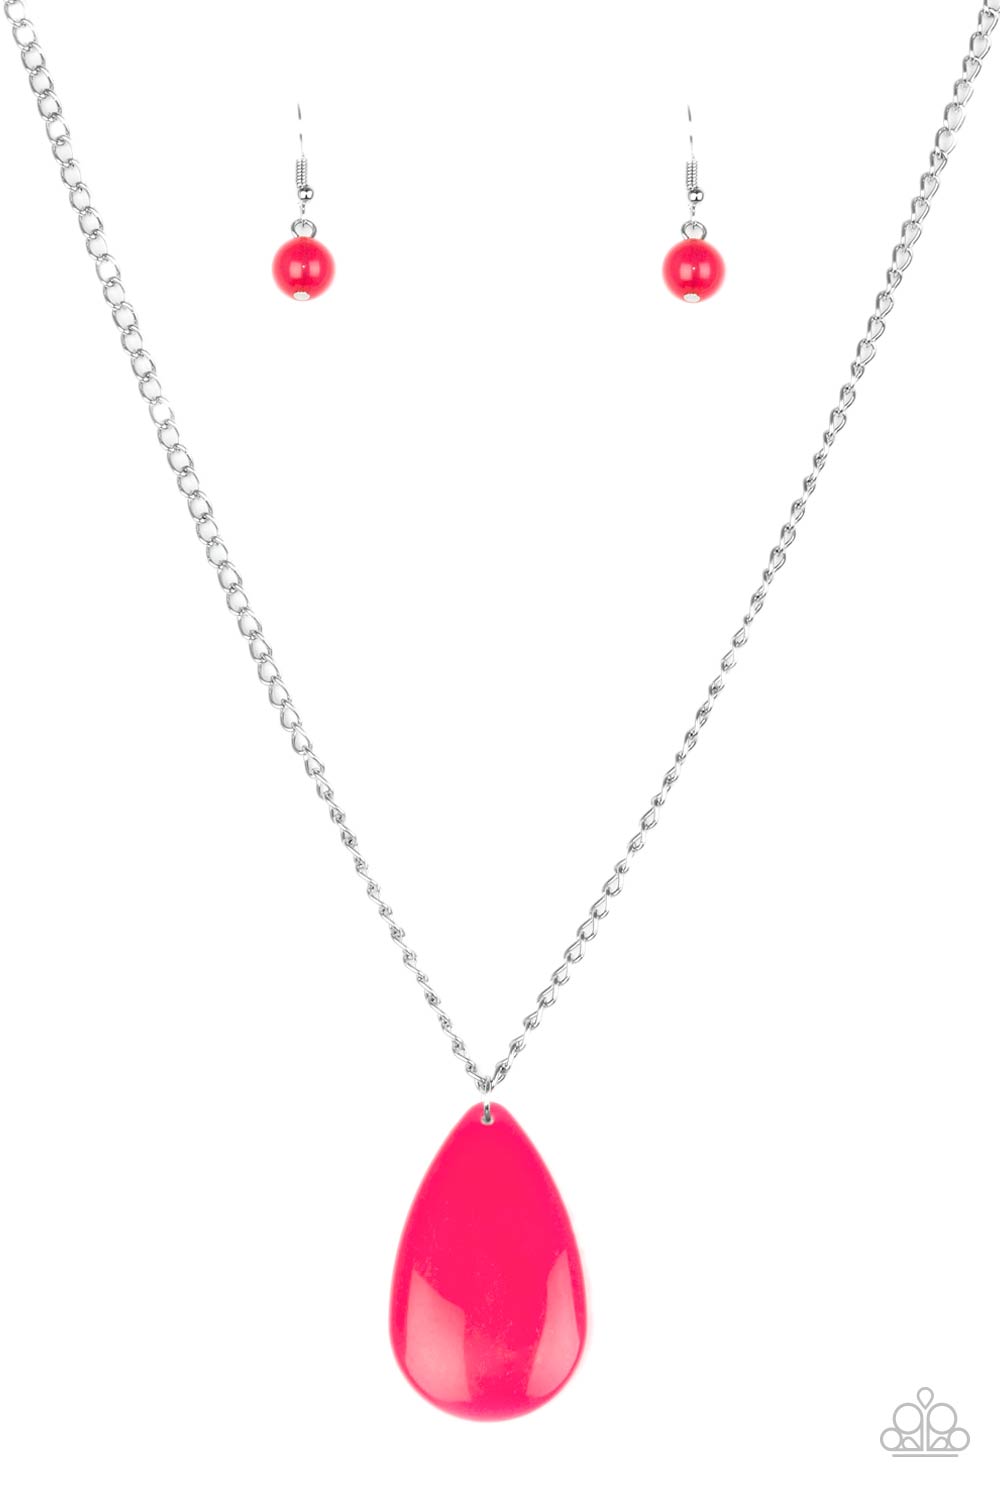 So Pop-YOU-lar Pink-Necklace